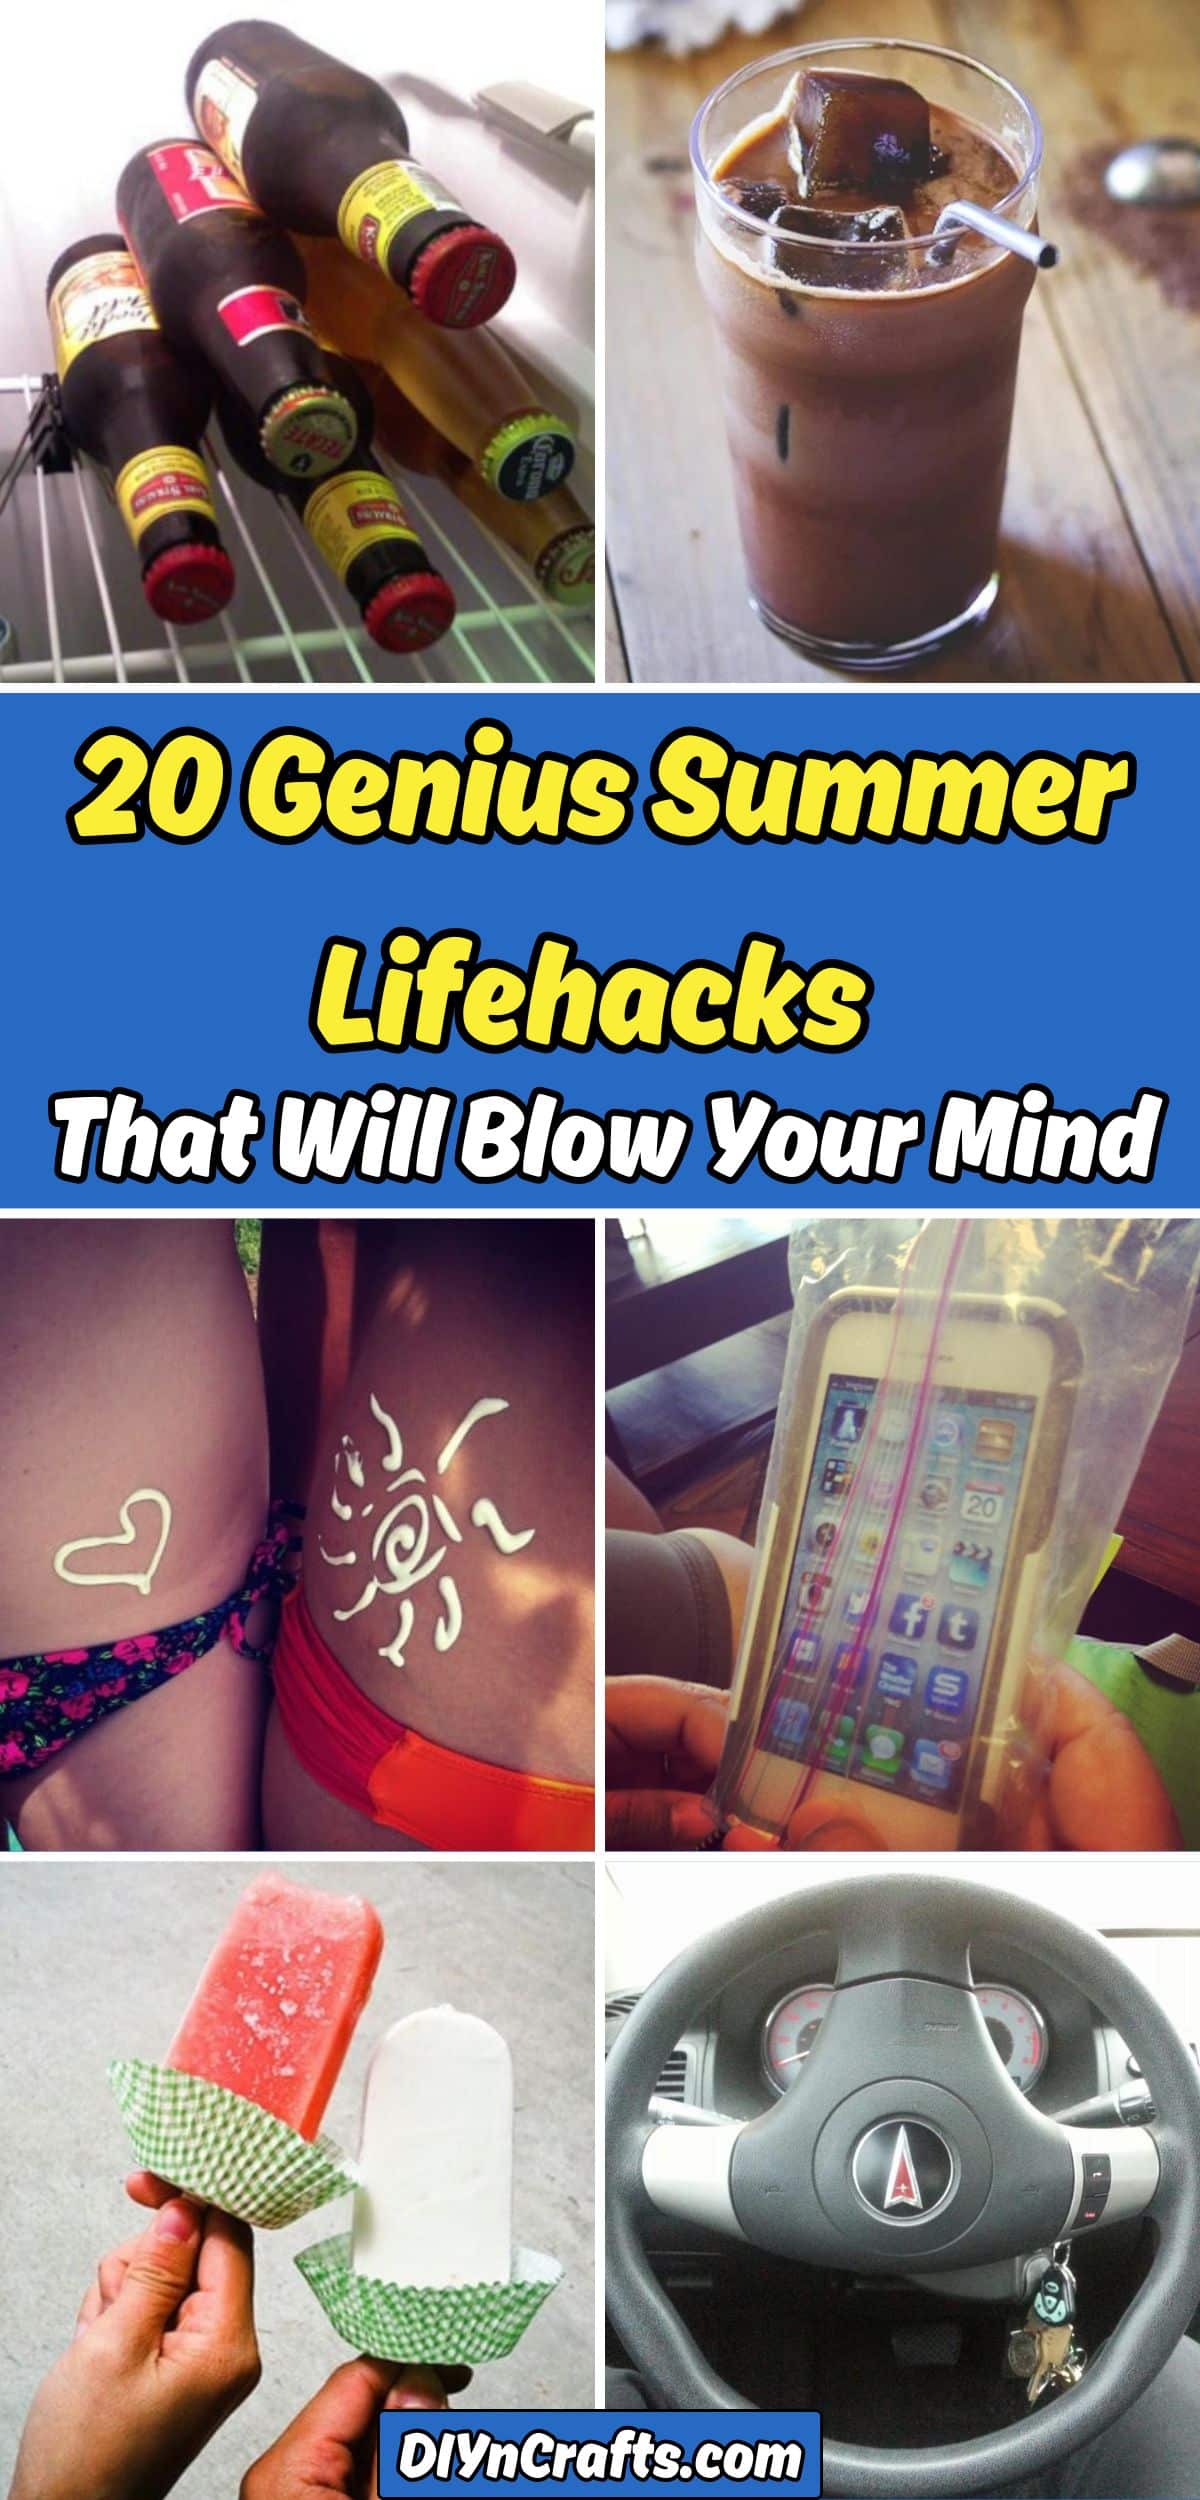 20 Genius Summer Lifehacks That Will Blow Your Mind collage.